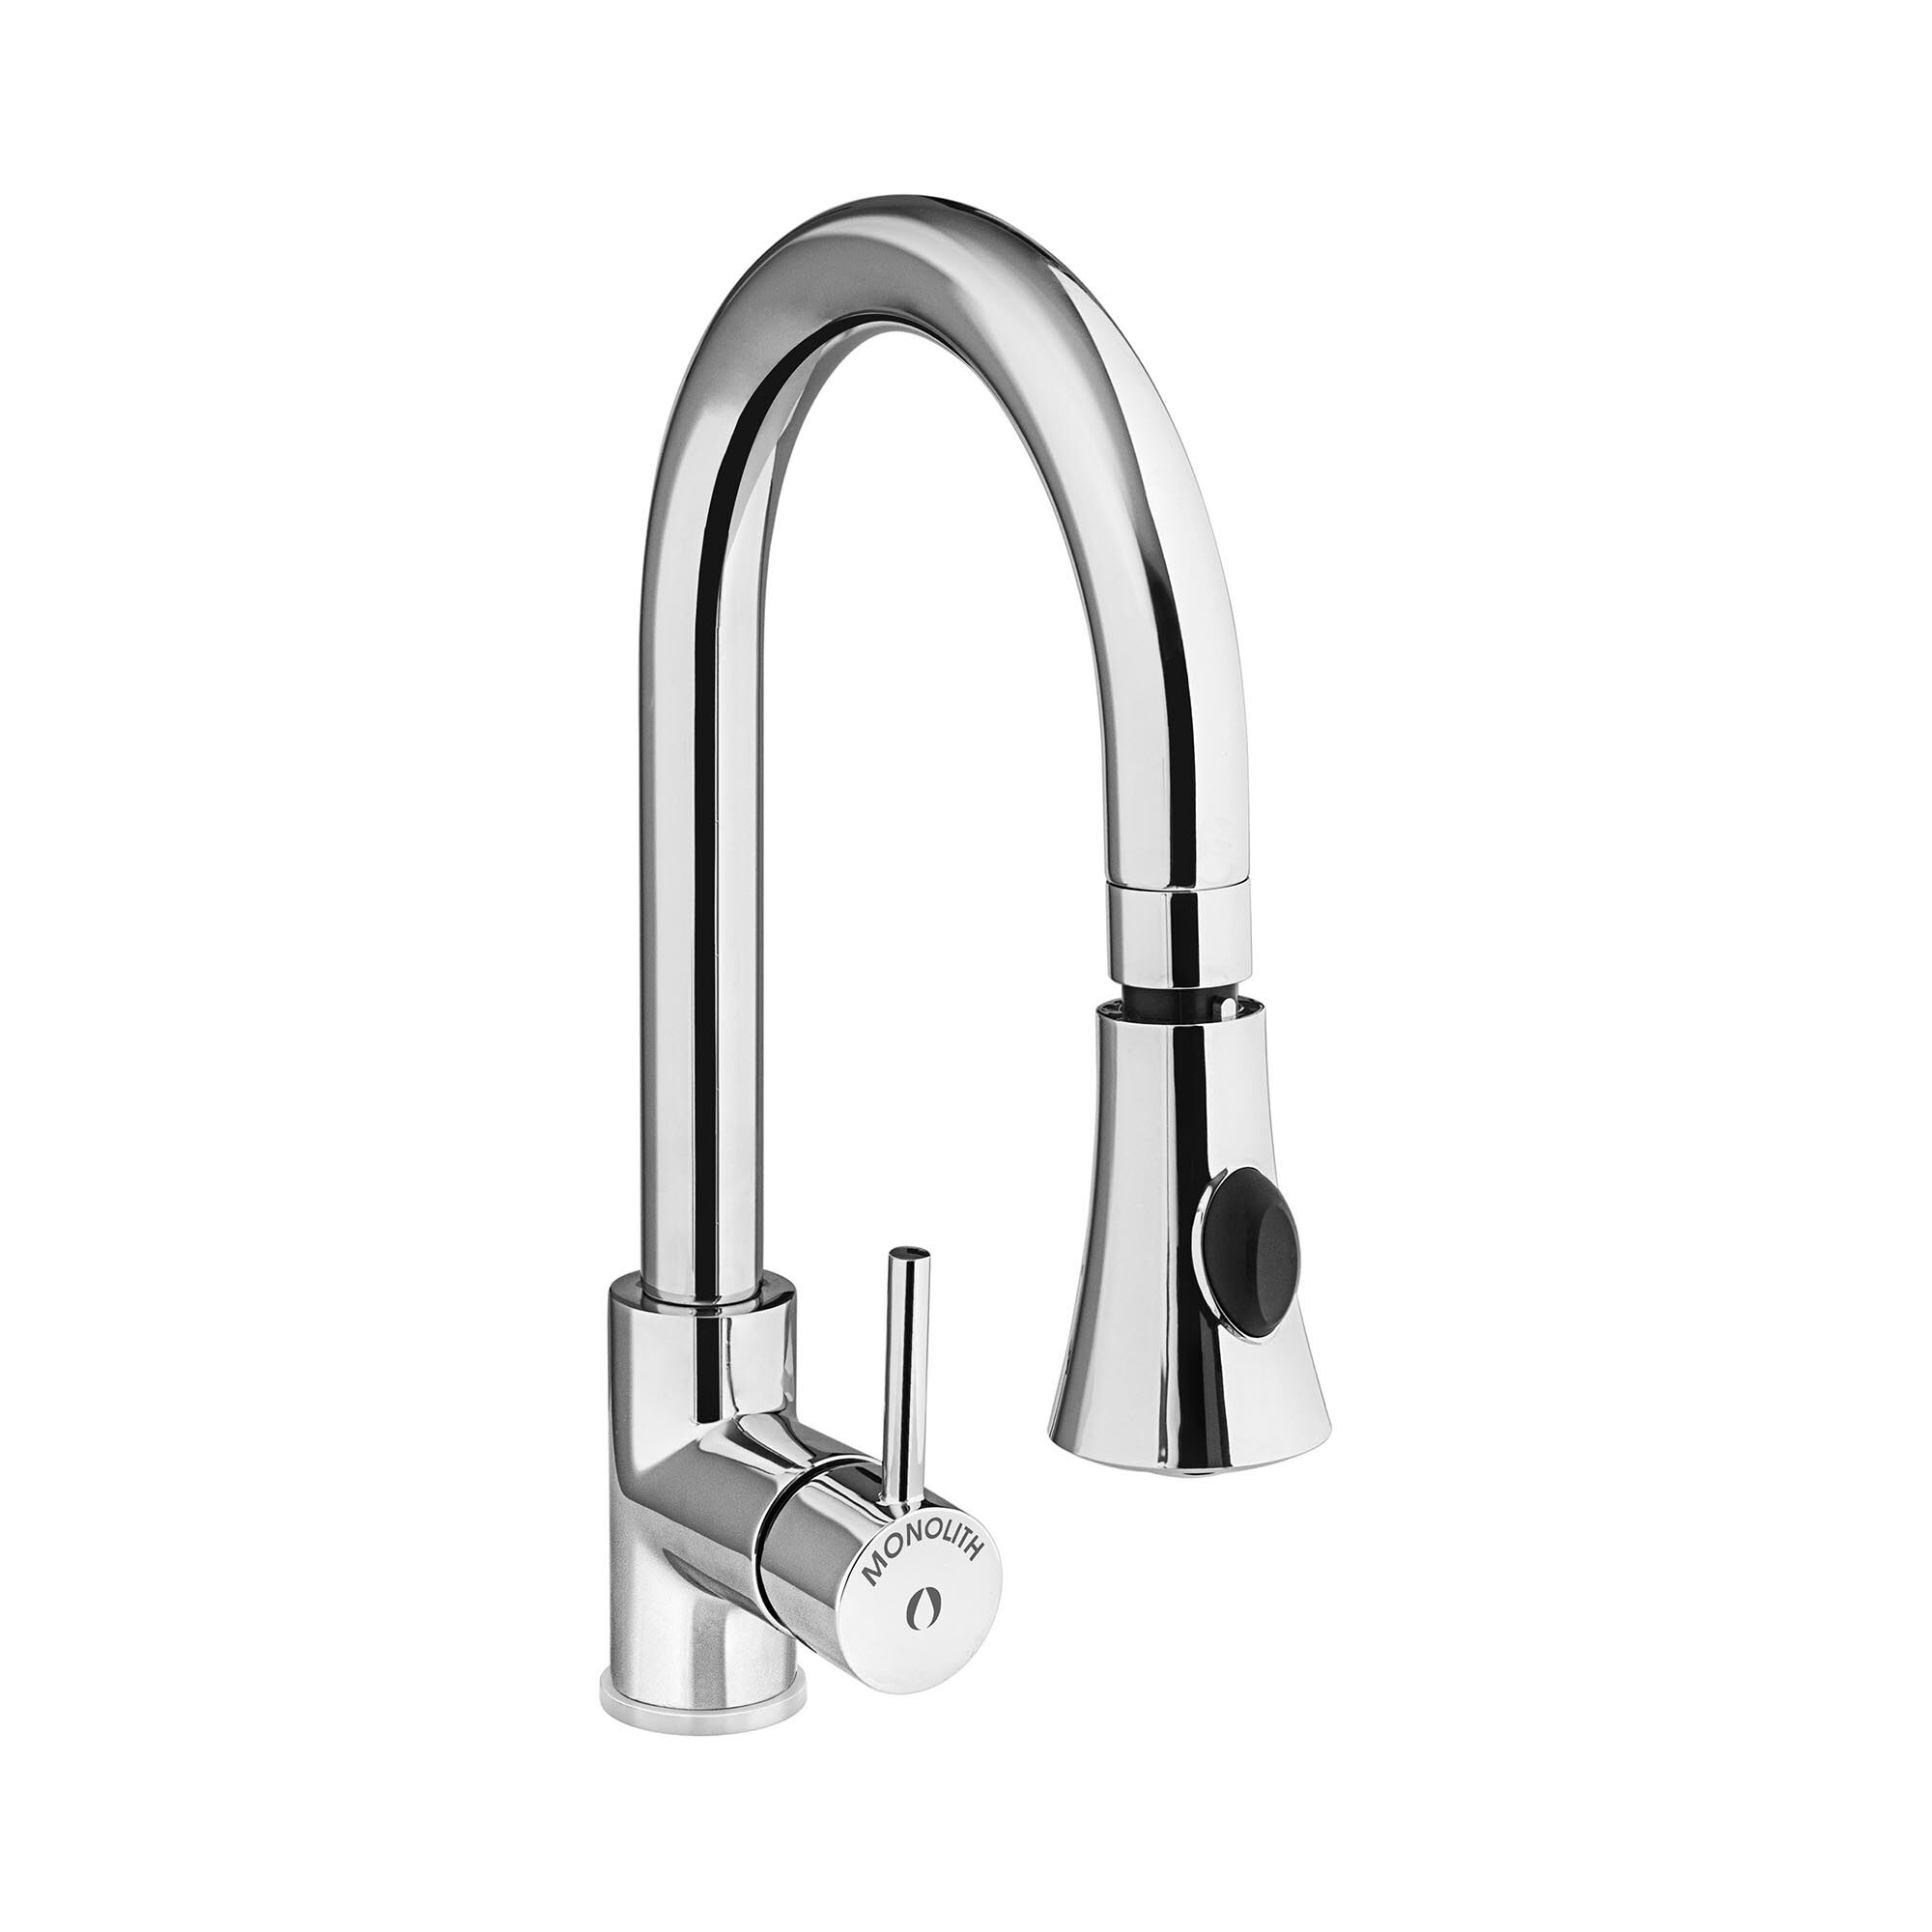 Monolith kitchen sink tap - integrated hose - Chrome-plated brass - 1200 mm hose